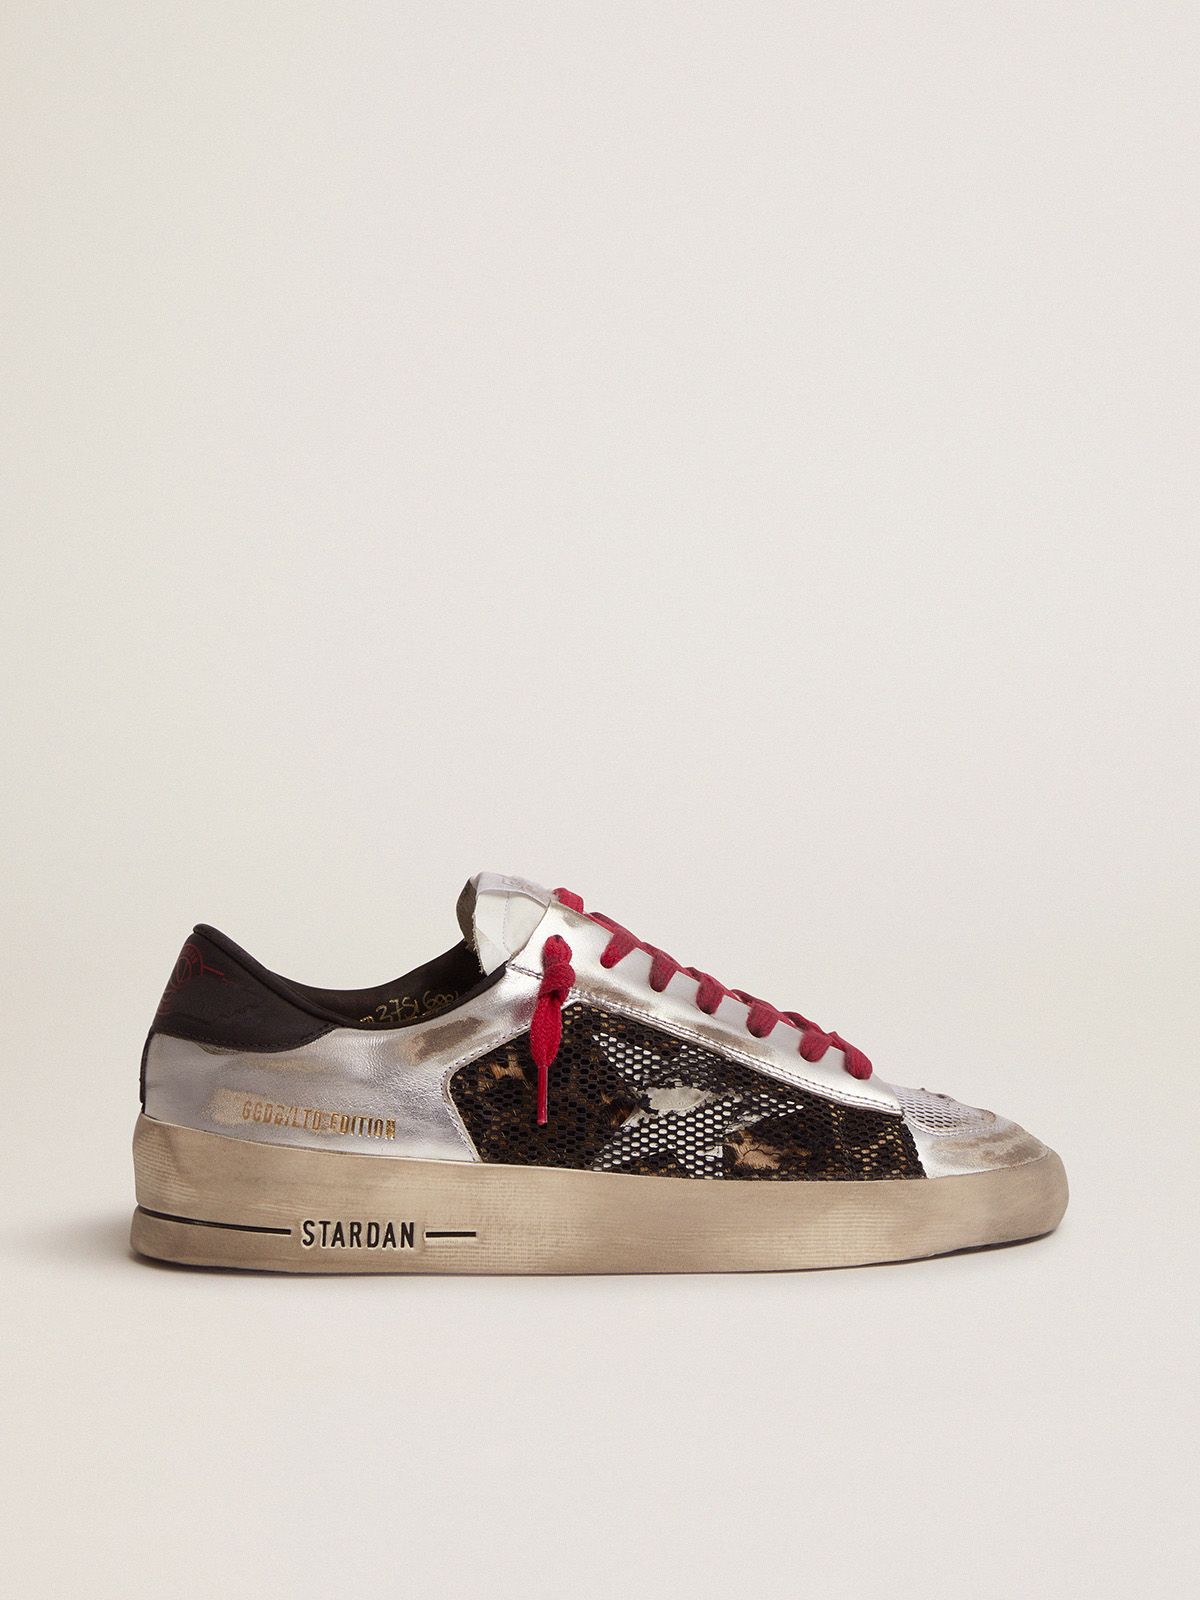 golden goose Limited and Women's LAB sneakers animal-print Stardan silver Edition